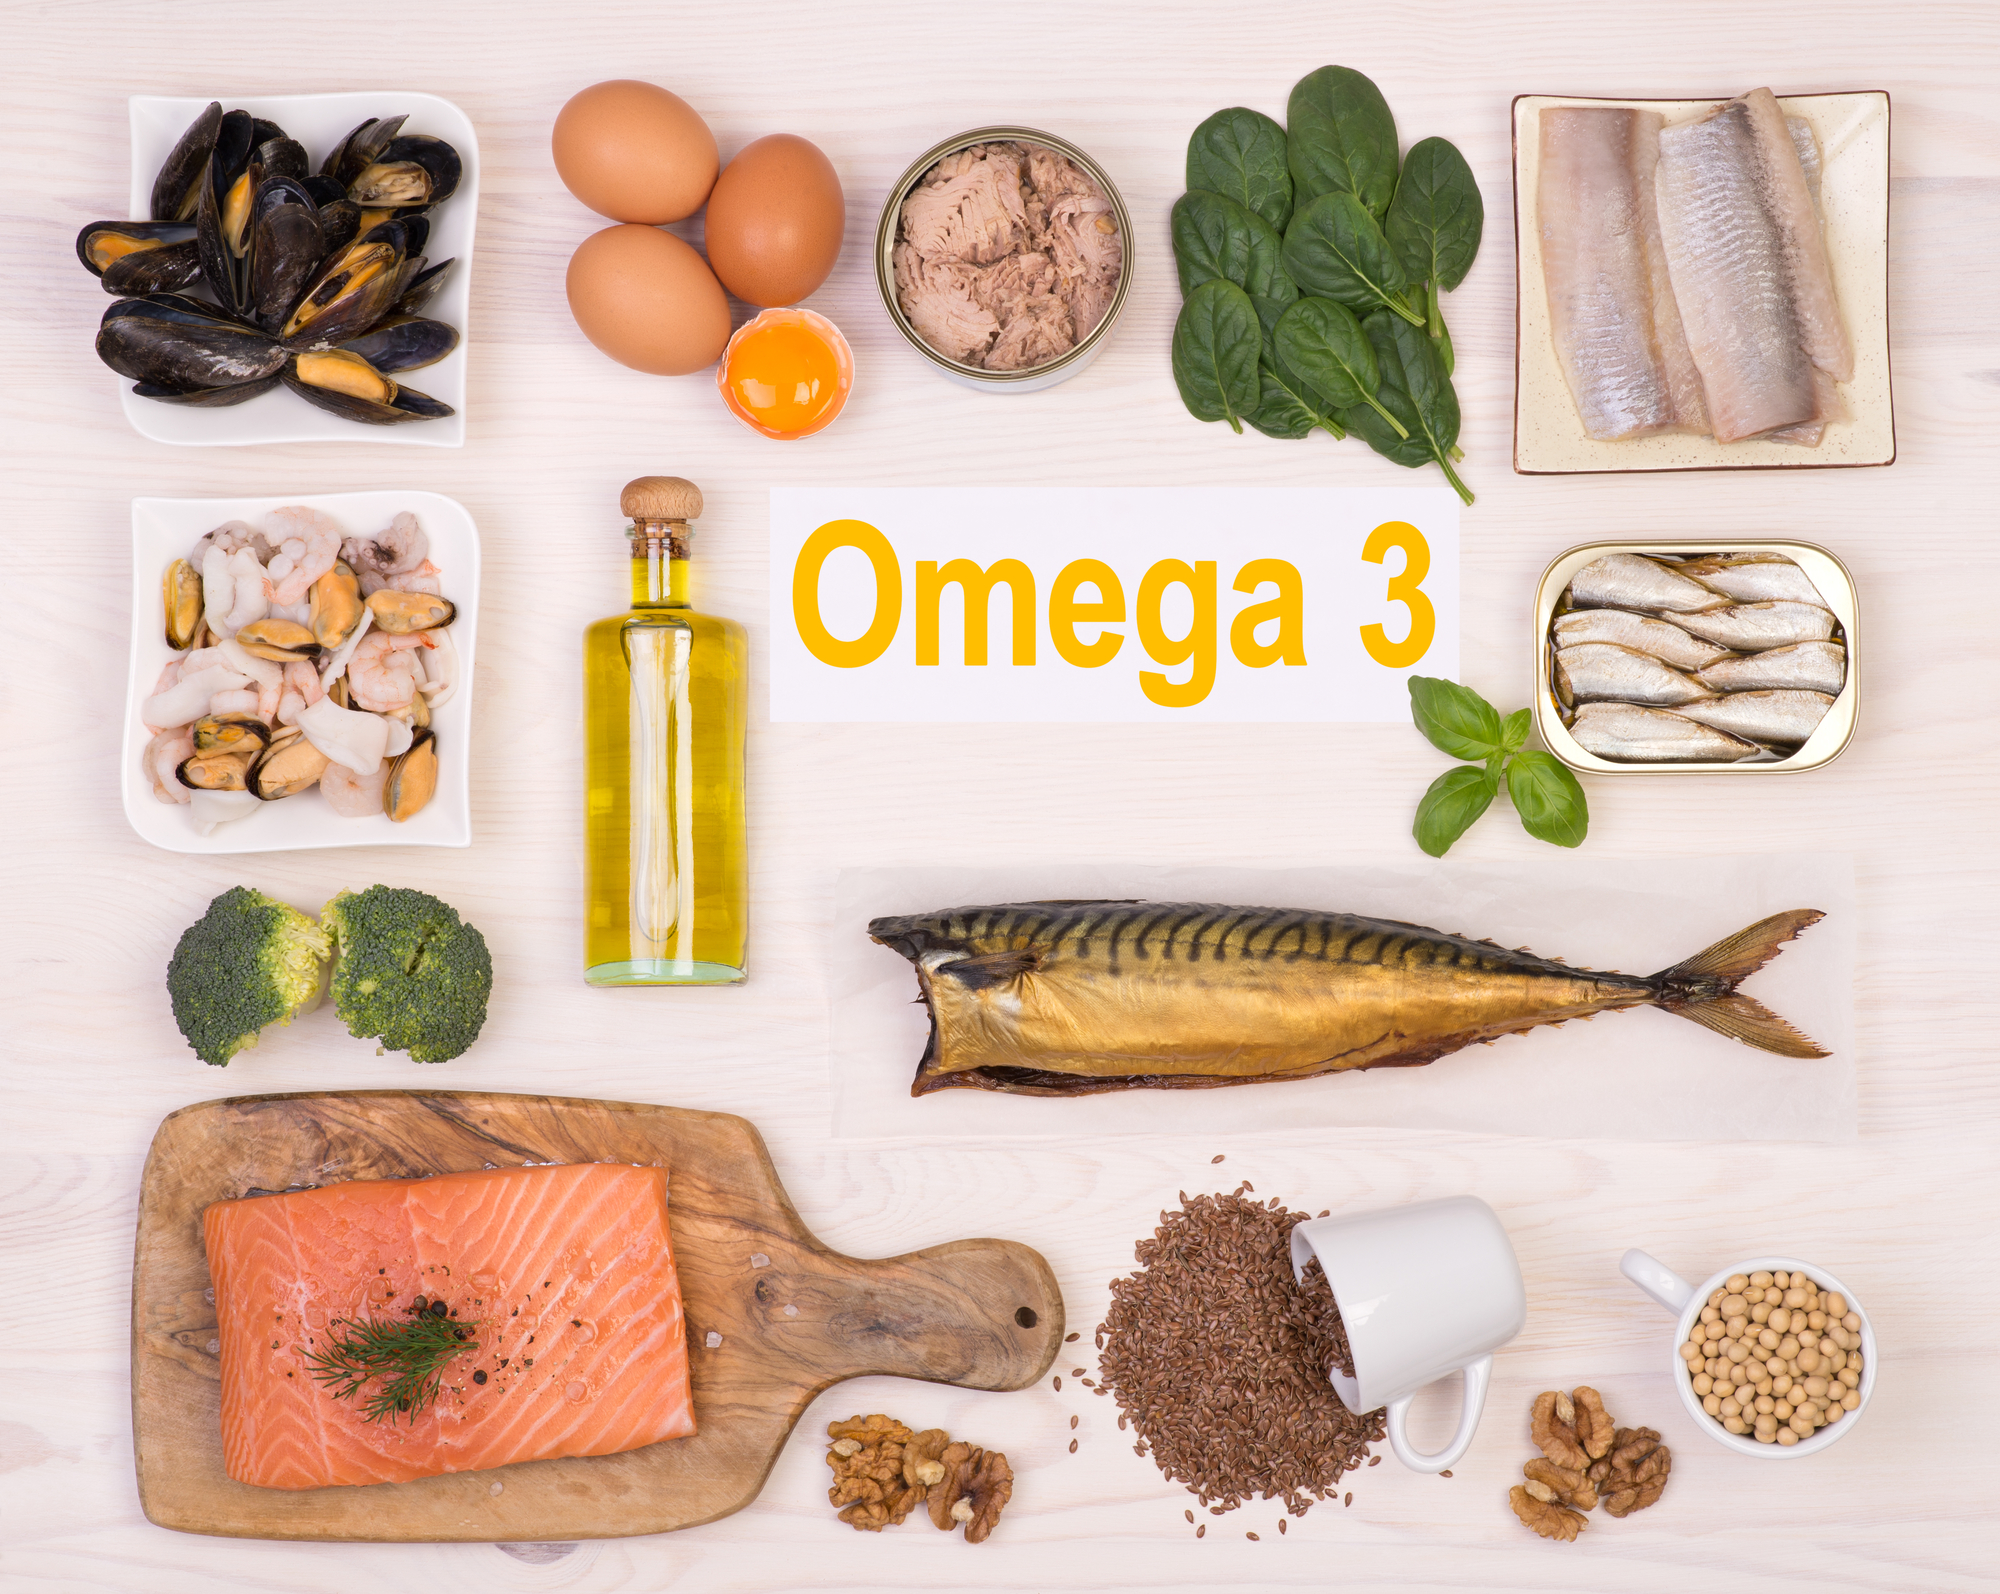 7 Foods Rich in Omega-3 Fatty Acids - For Help with ADHD, Autism ...